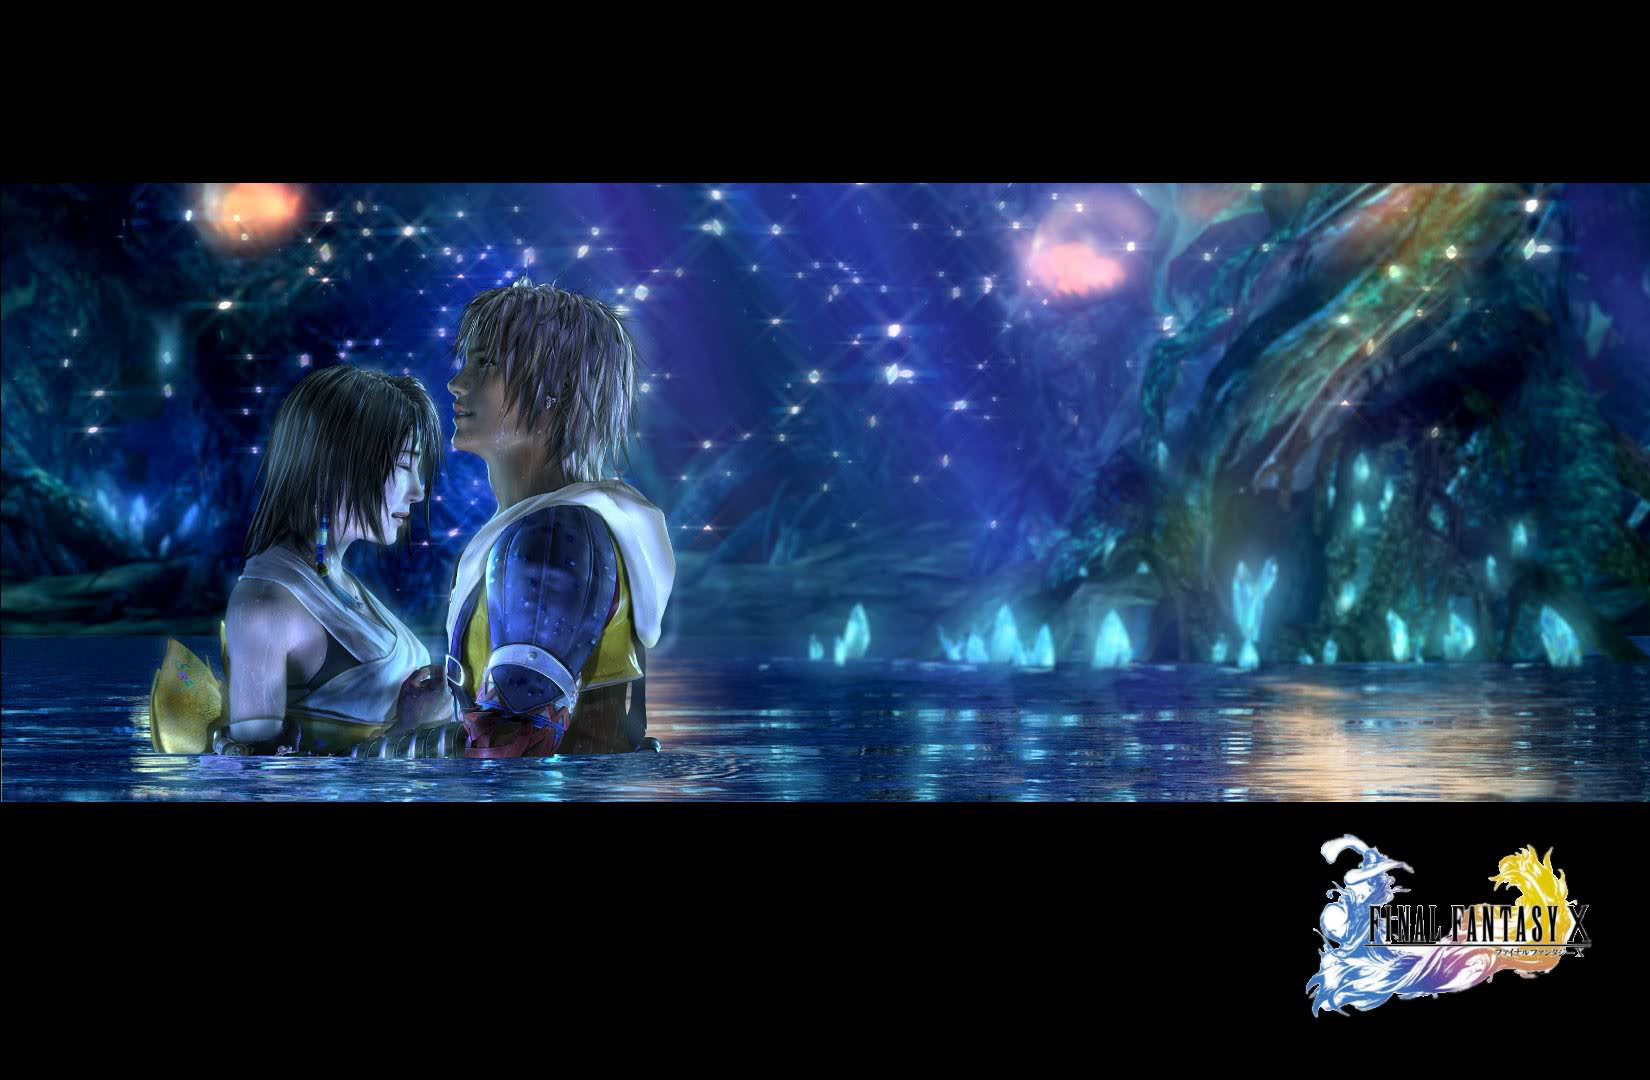 Tidus And Yuna In An Underground Crystal Cave - Final Fantasy 10 Lake - HD Wallpaper 